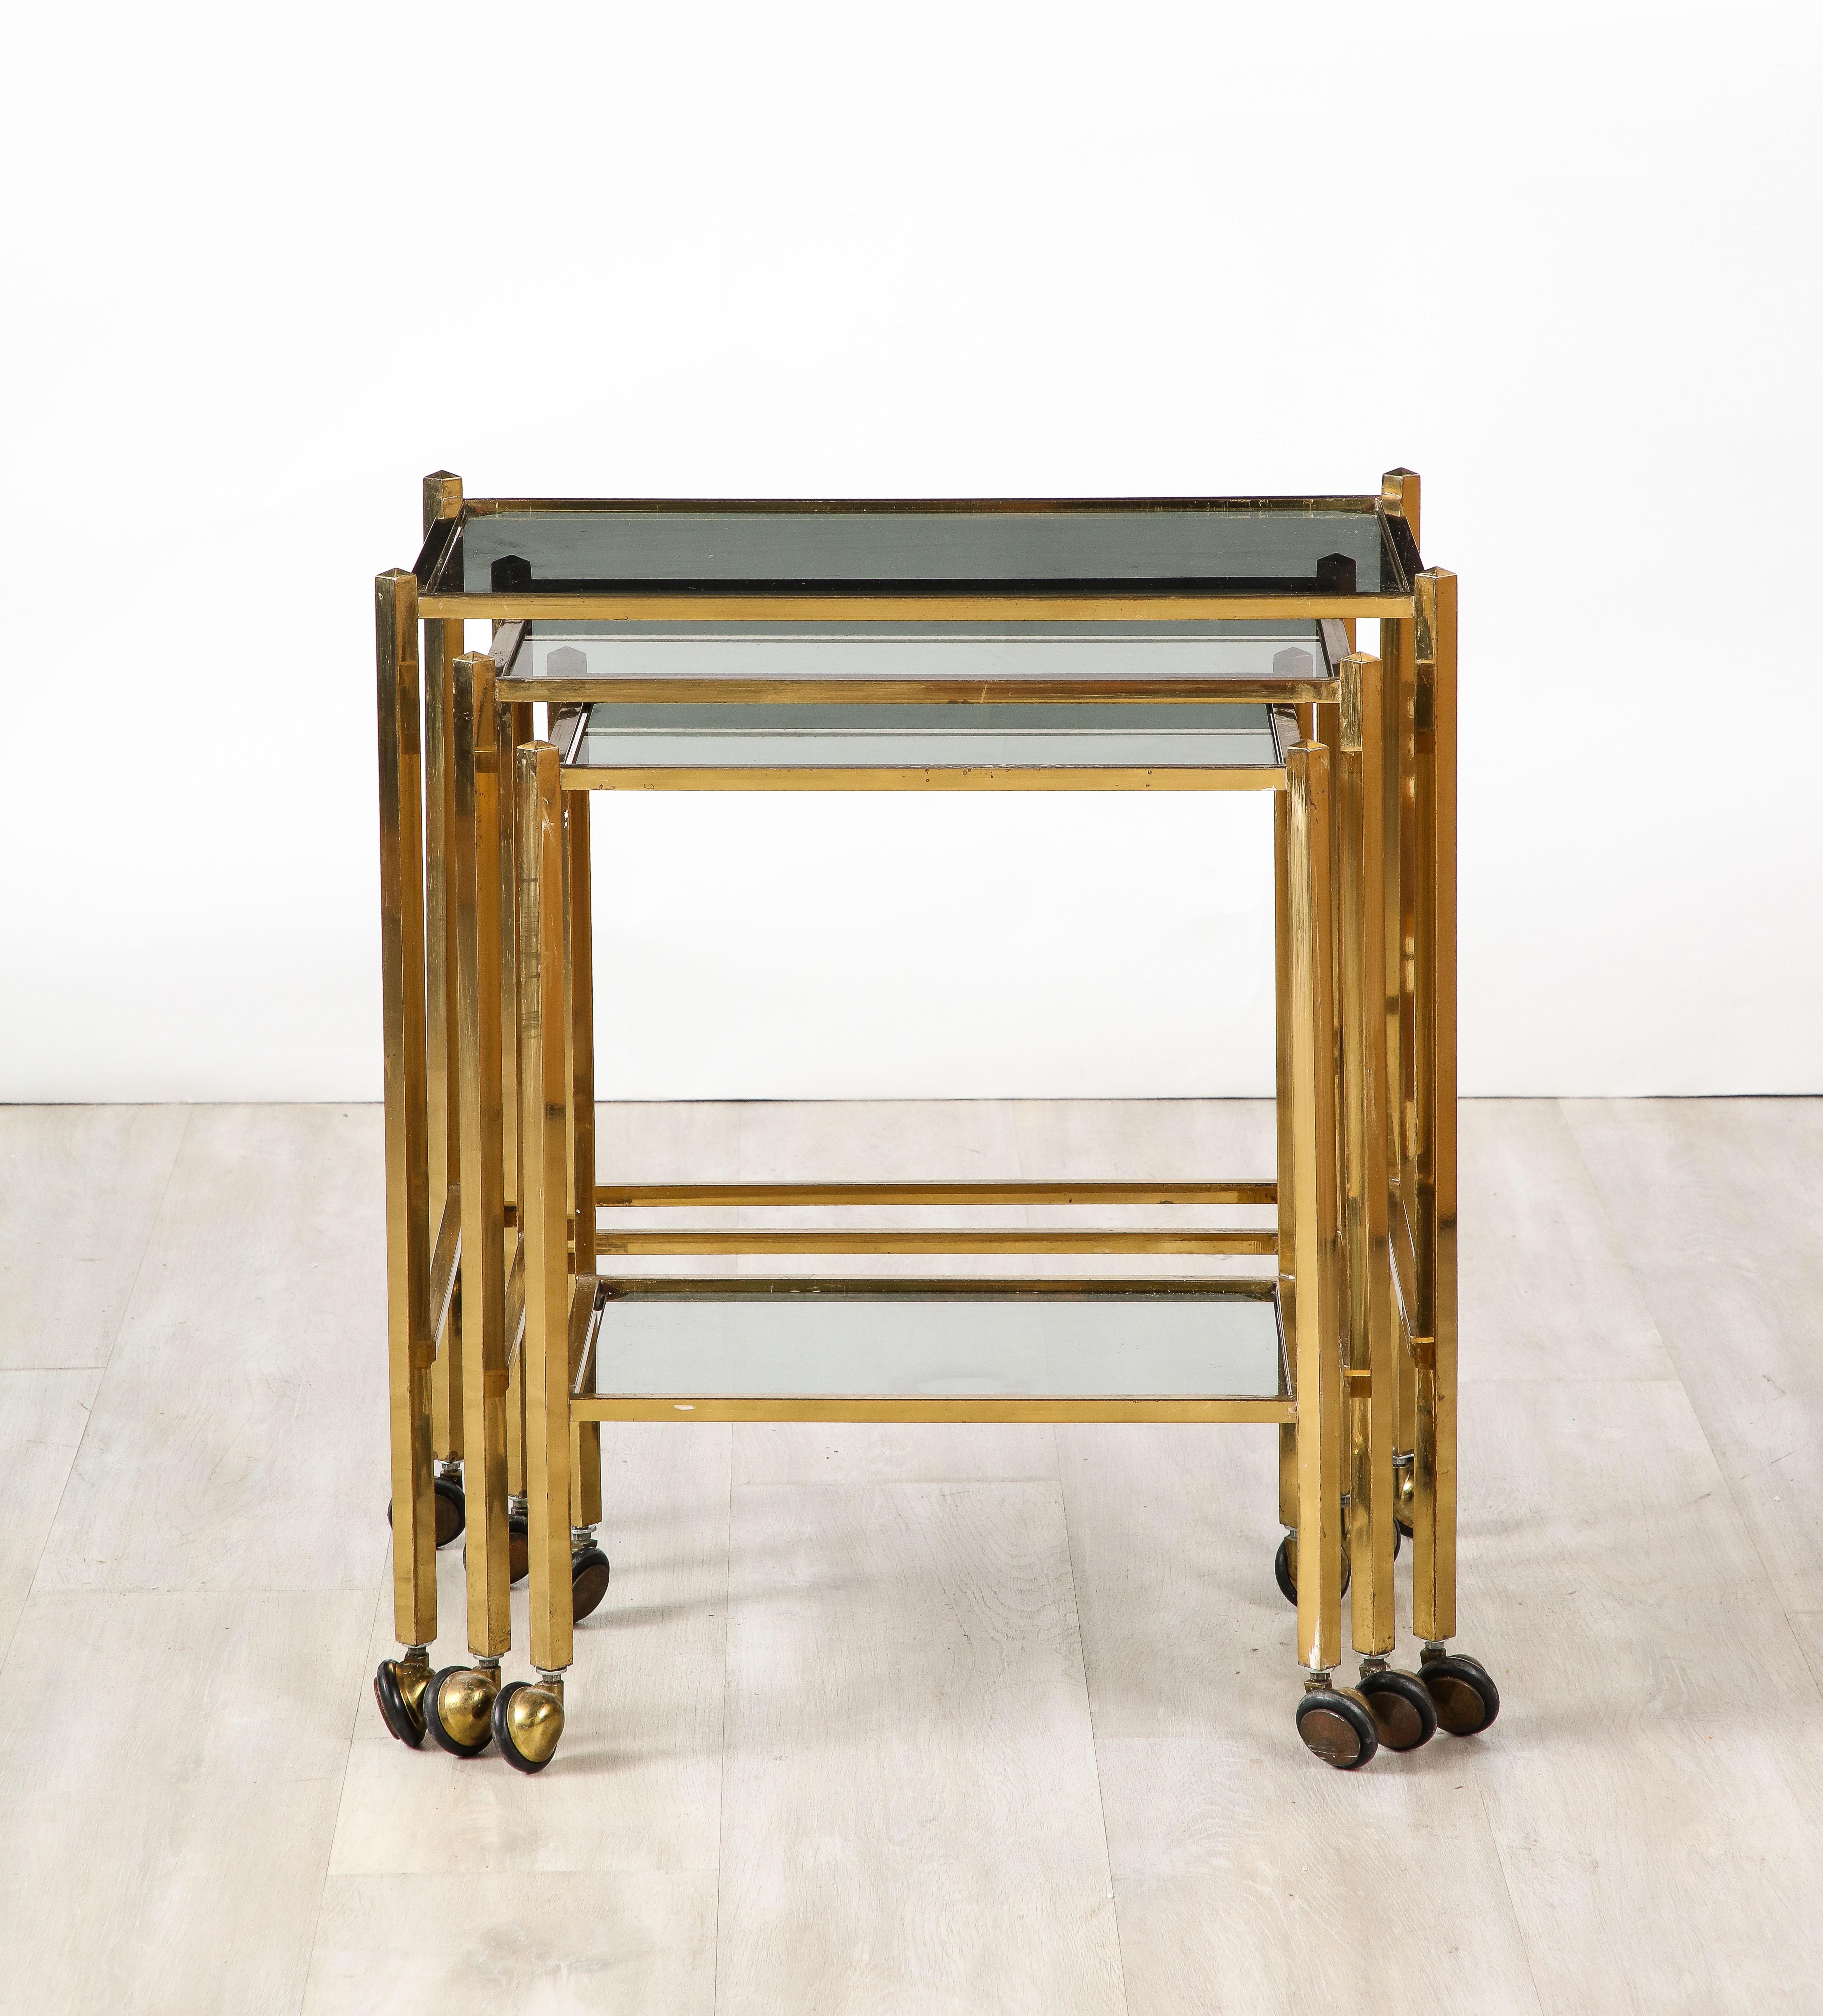 Set of three Italian mid-century modern brass and smoked glass nesting tables with rolling feet. Highly practical, classic and chic, perfect for any interior style.
Italy, circa 1960 
Size: Tallest table: 23 1/4